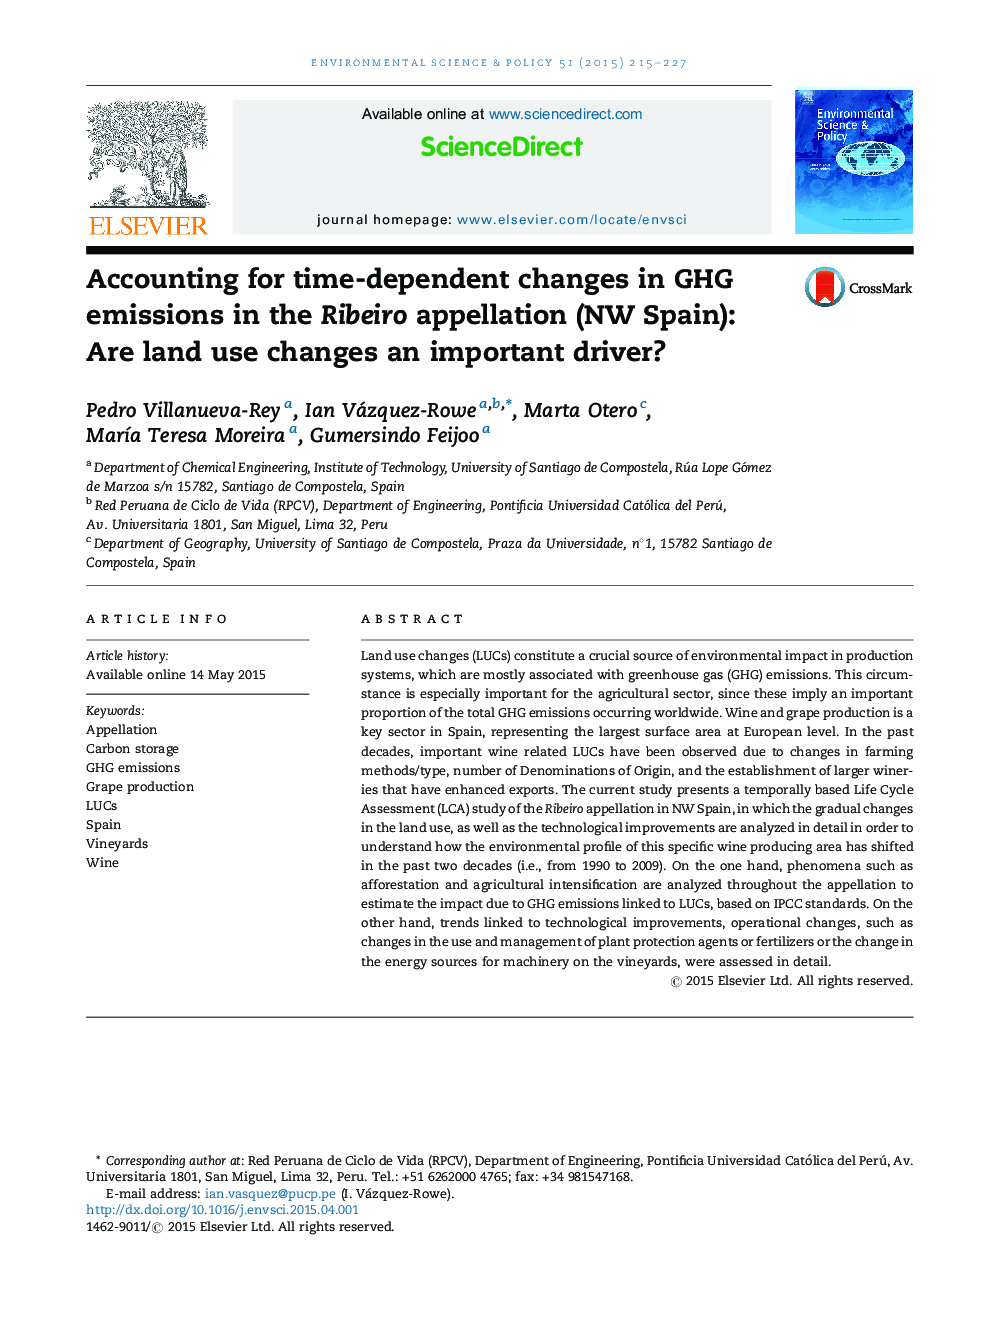 Accounting for time-dependent changes in GHG emissions in the Ribeiro appellation (NW Spain): Are land use changes an important driver?